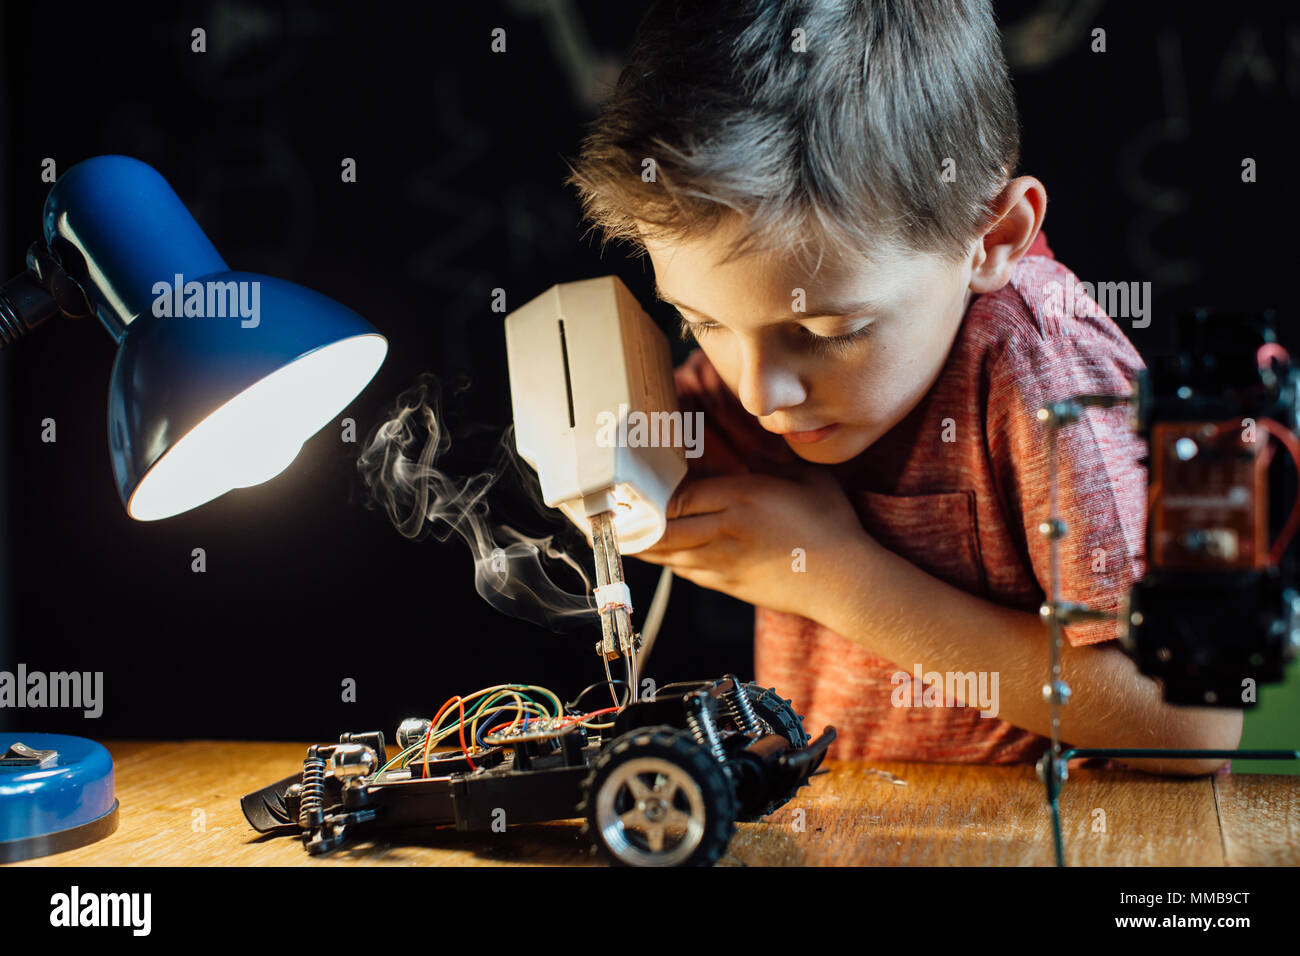 Portrait of a clever young school boy soldering metal parts of his toy car together. Focused child using a soldering gun with his school project. Stock Photo